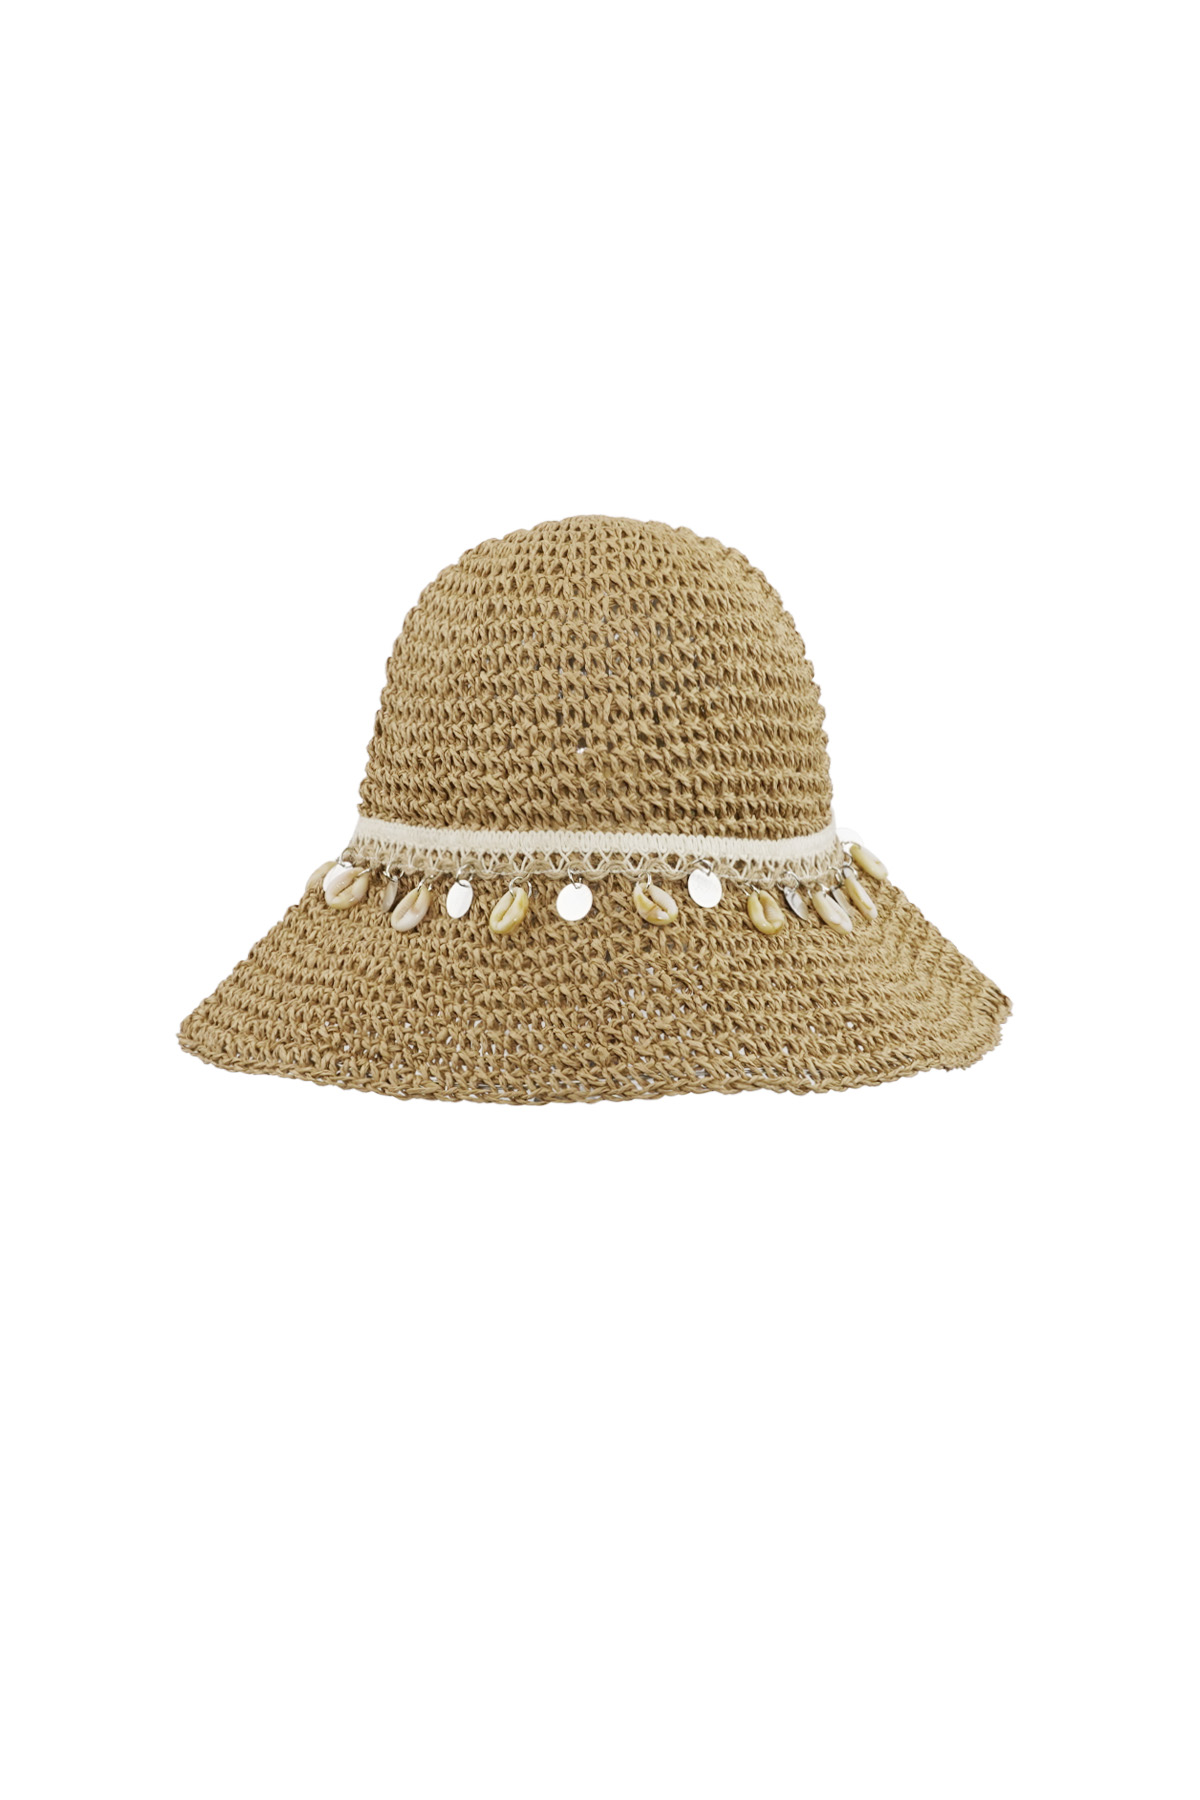 Beach hat with shells - brown